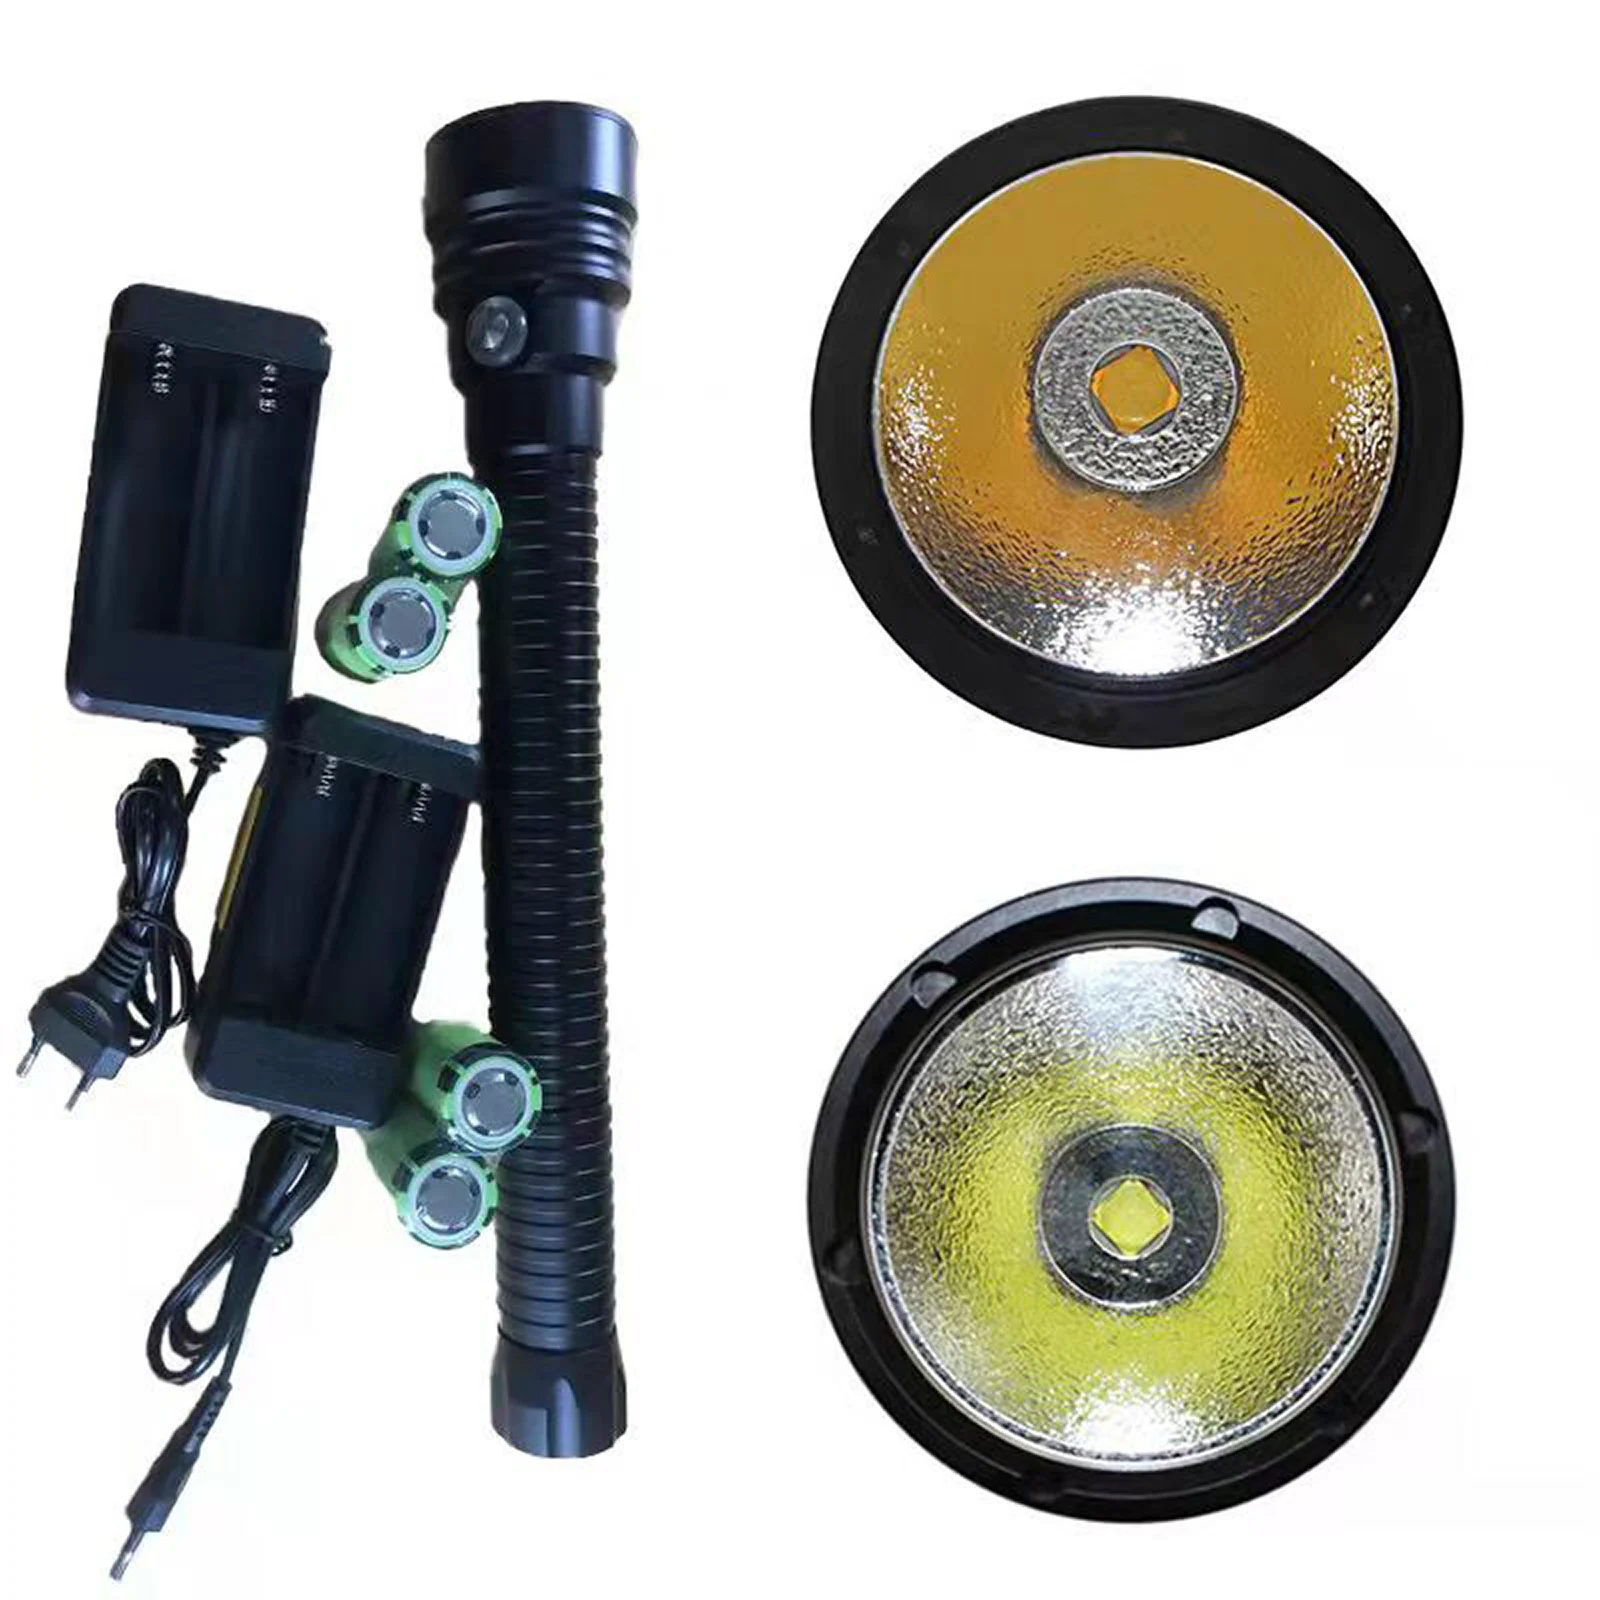 Powerful XHP70.2 led Yellow/White Light 4000 Lumens Diving Flashlight Torch 2/3/4/*26650 battery dive light led underwater xhp70 3 7v 4000 mah 14 8wh 606090 polymer li lipo battery 3 wire thermistor jst ph 3pin 2 0mm connector for gps power bank tablet pc